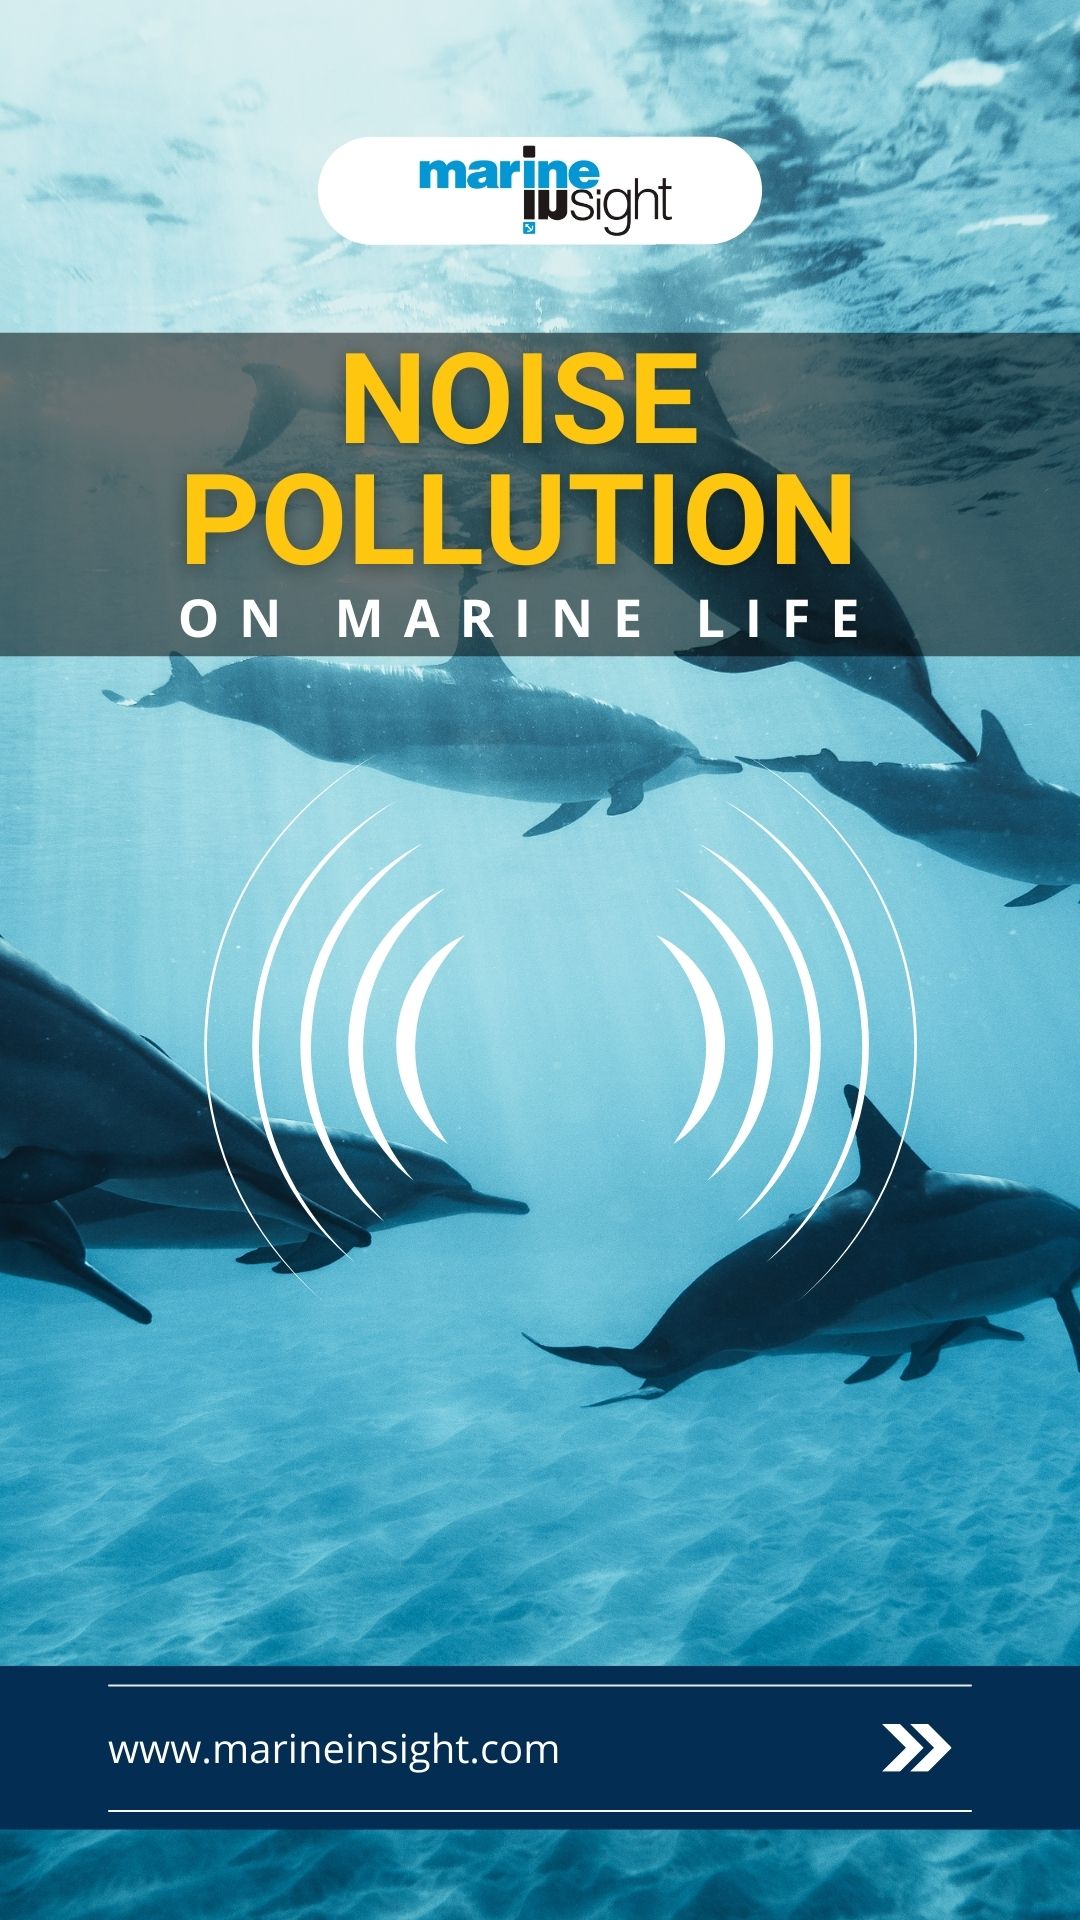 Effects of Noise on Marine Life